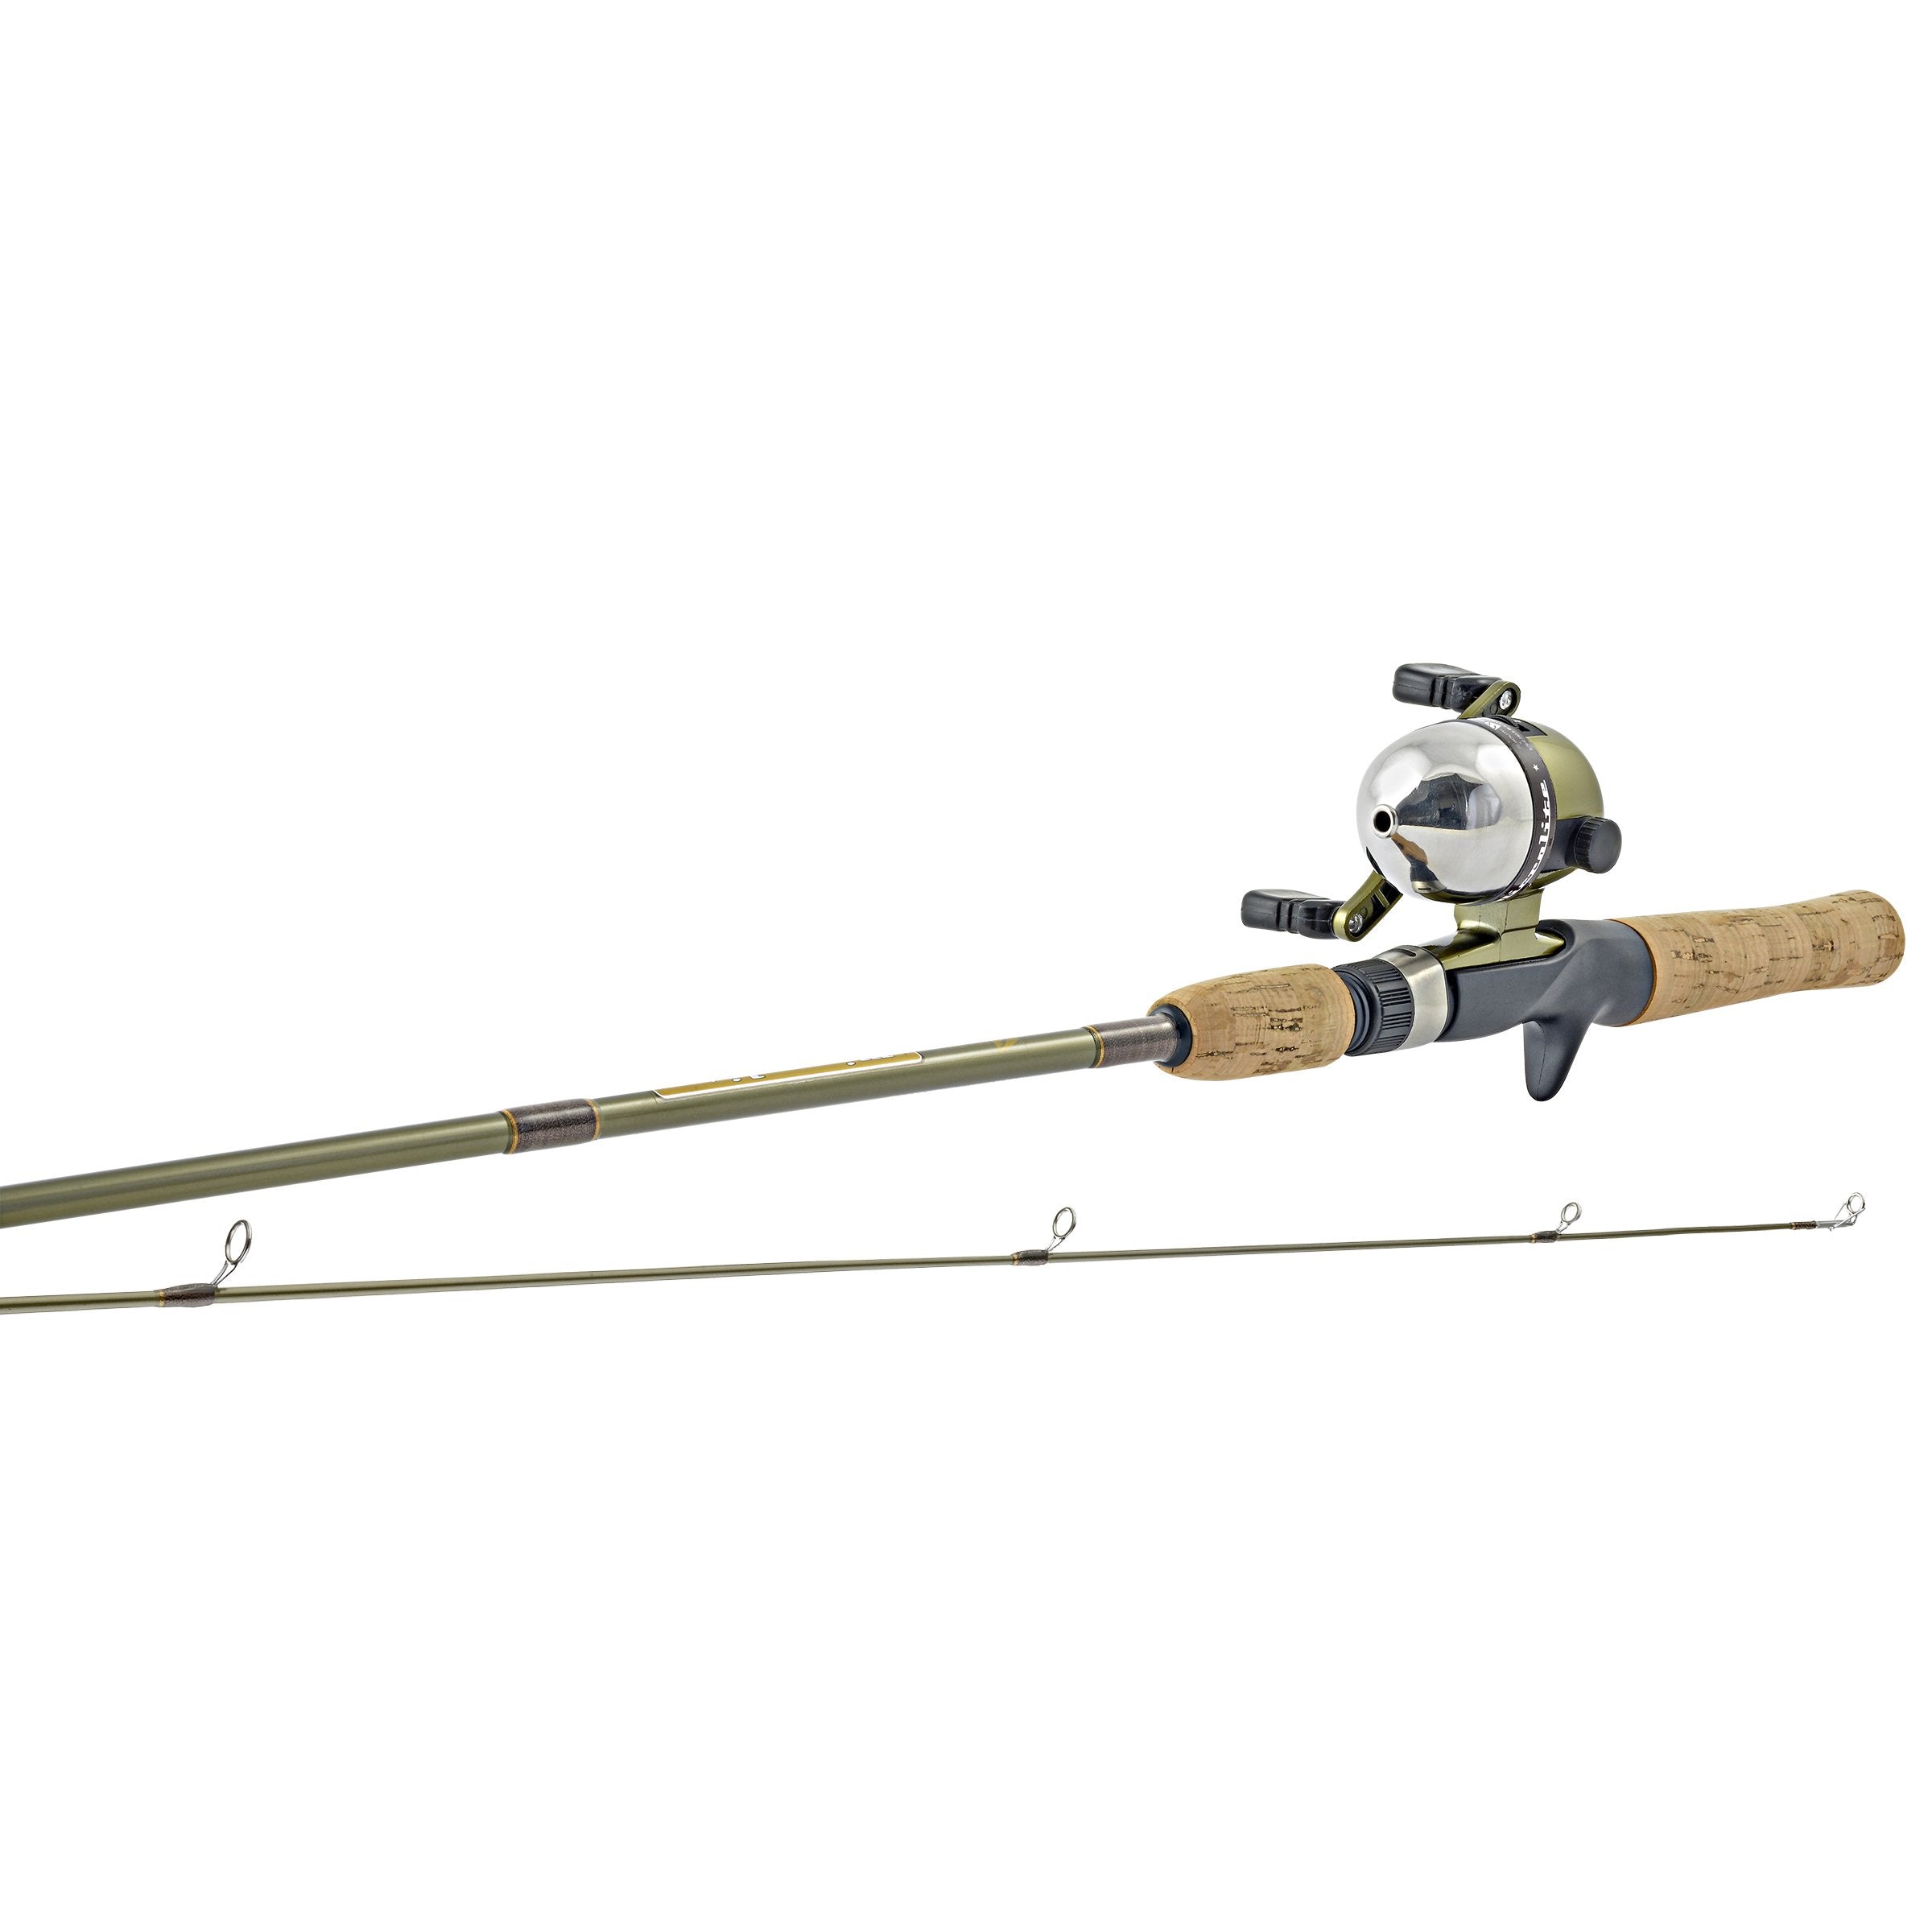 South Bend Black Beauty Trolling Downrigger Combo - 8.5-foot - 16982711 -   Shopping - The Best Prices on South Bend Fishing Rod &  Reel Combos